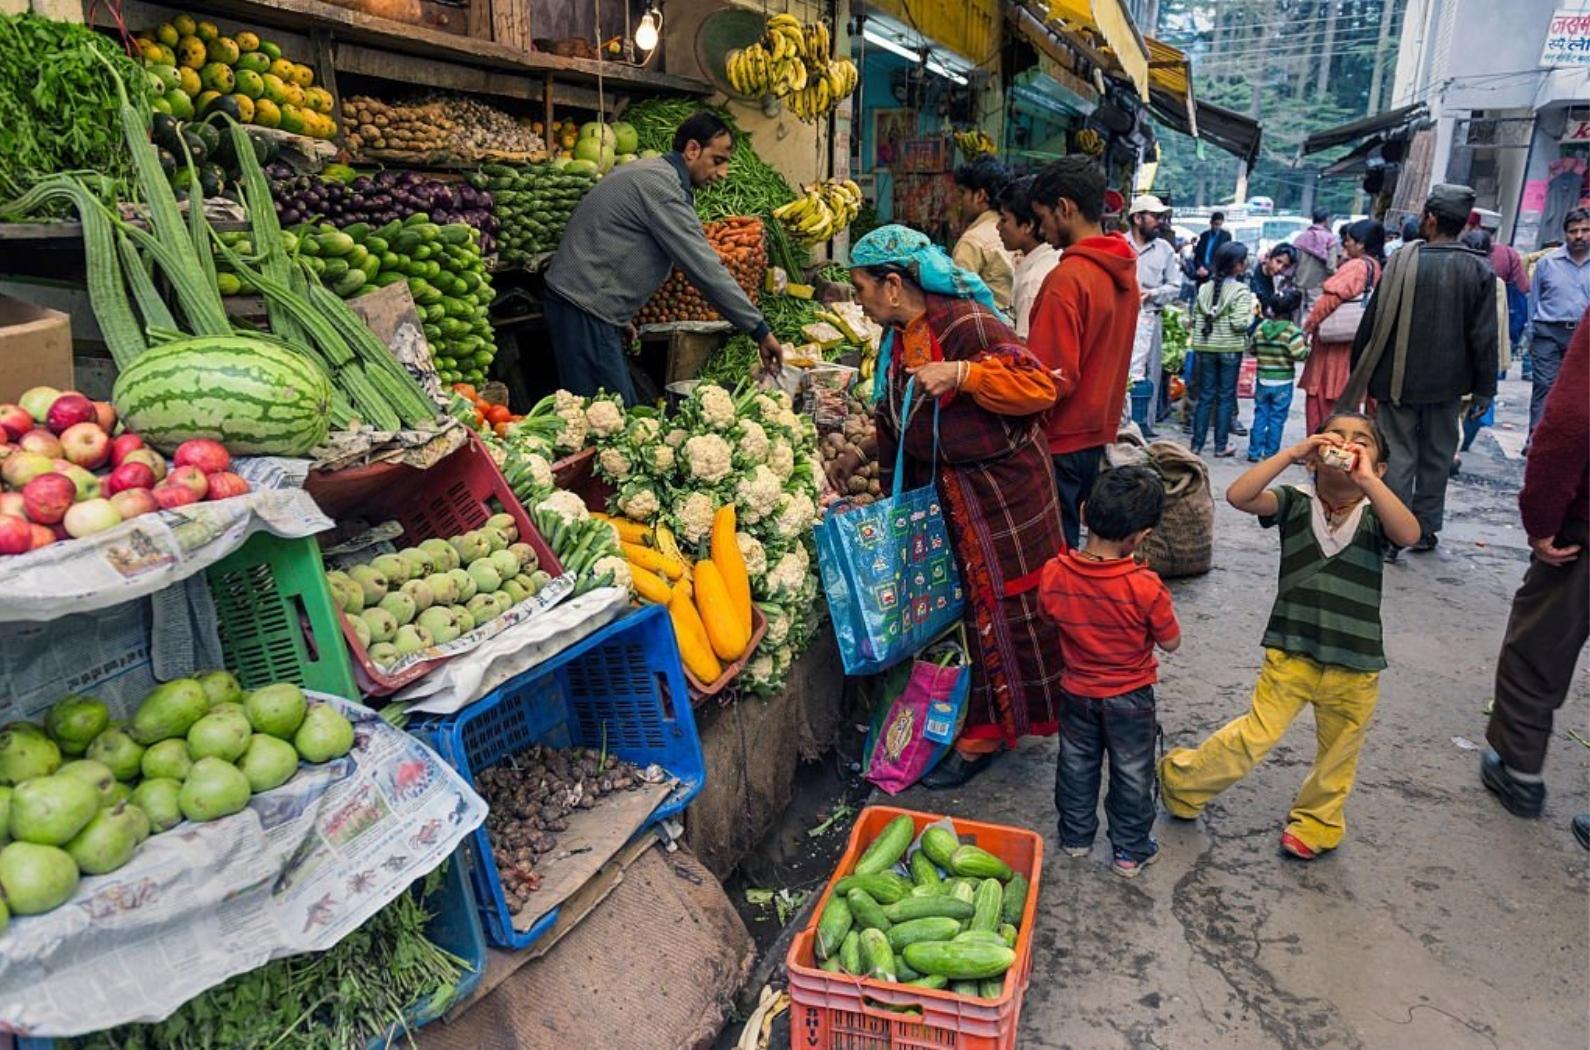 Indian woman in traditional clothes buying vegetable from man almost hidden by the products.